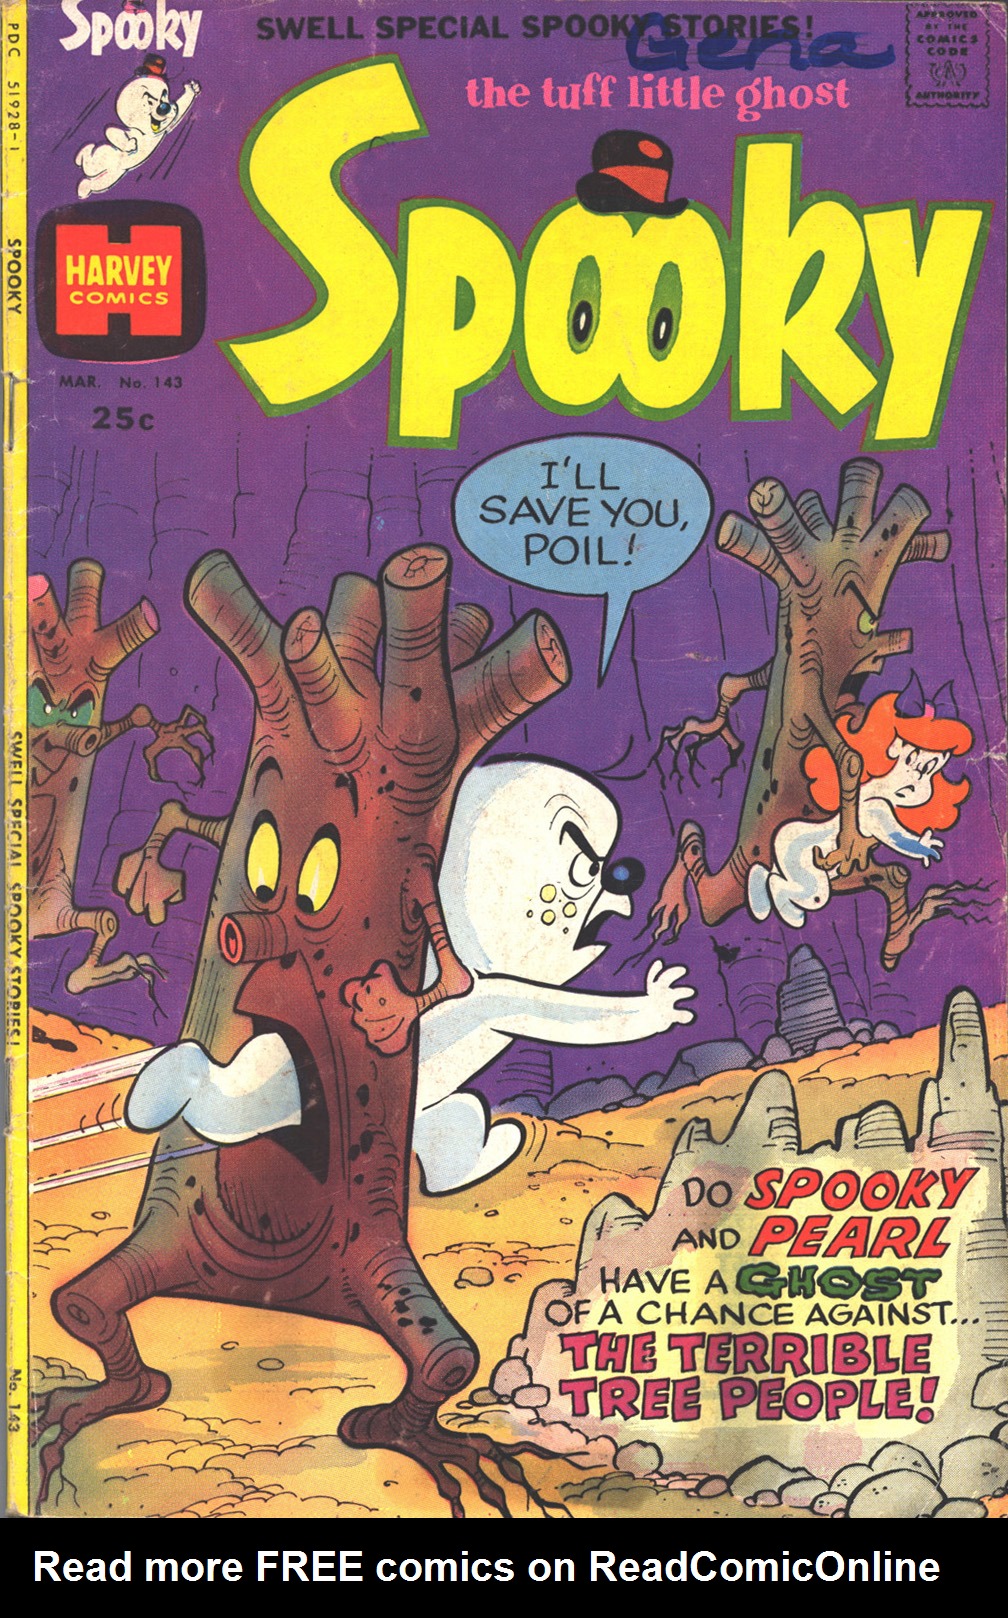 Read online Spooky comic -  Issue #143 - 1